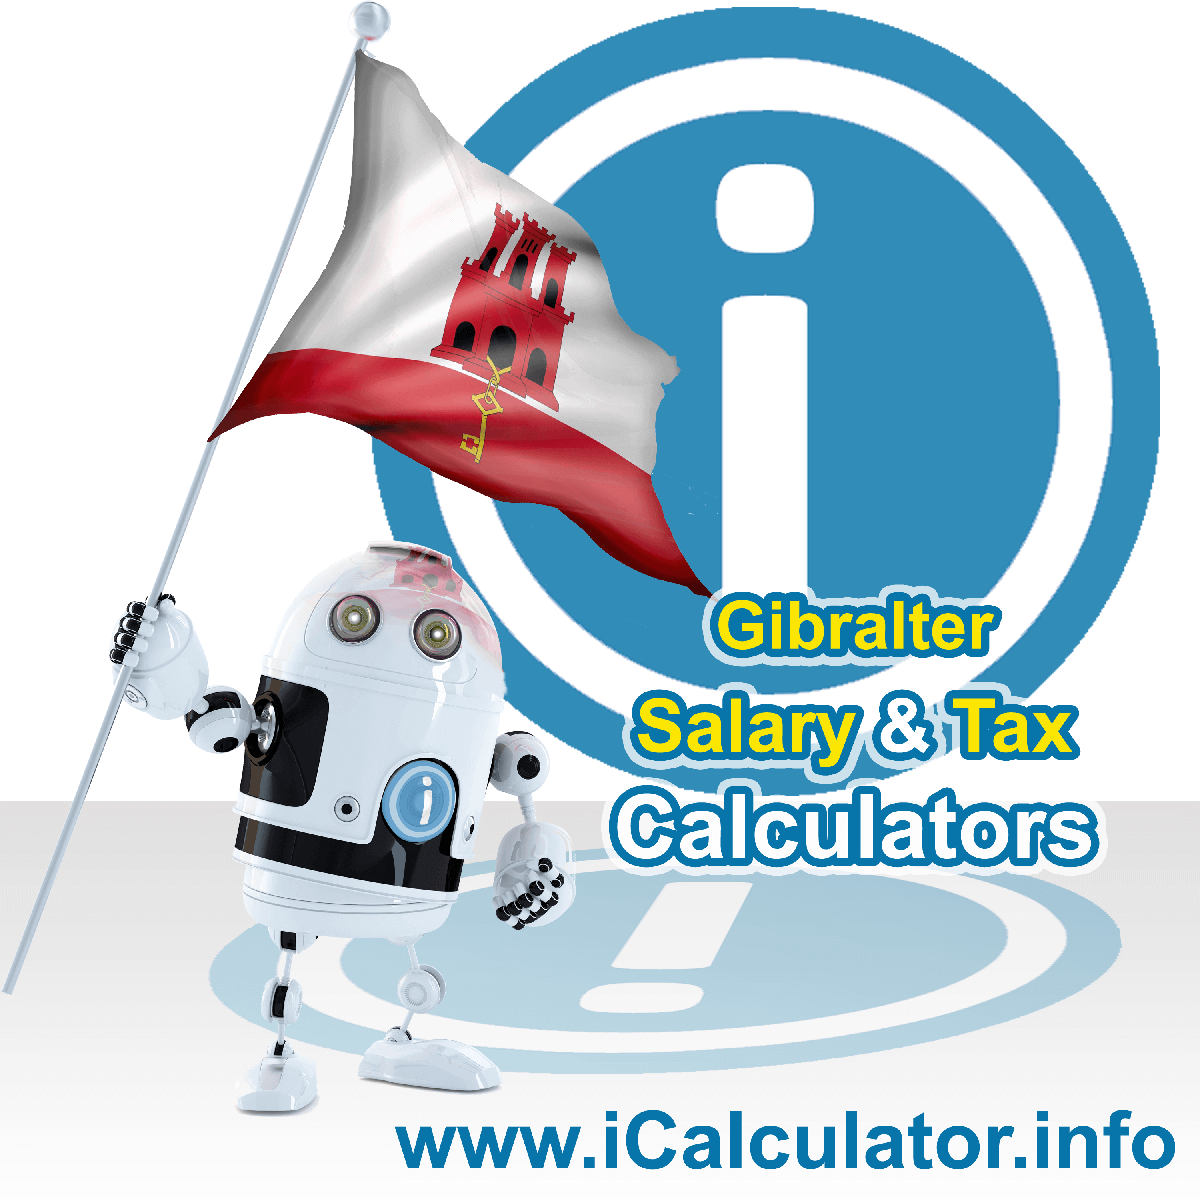 Gibraltar Tax Calculator. This image shows the Gibraltar flag and information relating to the tax formula for the Gibraltar Salary Calculator